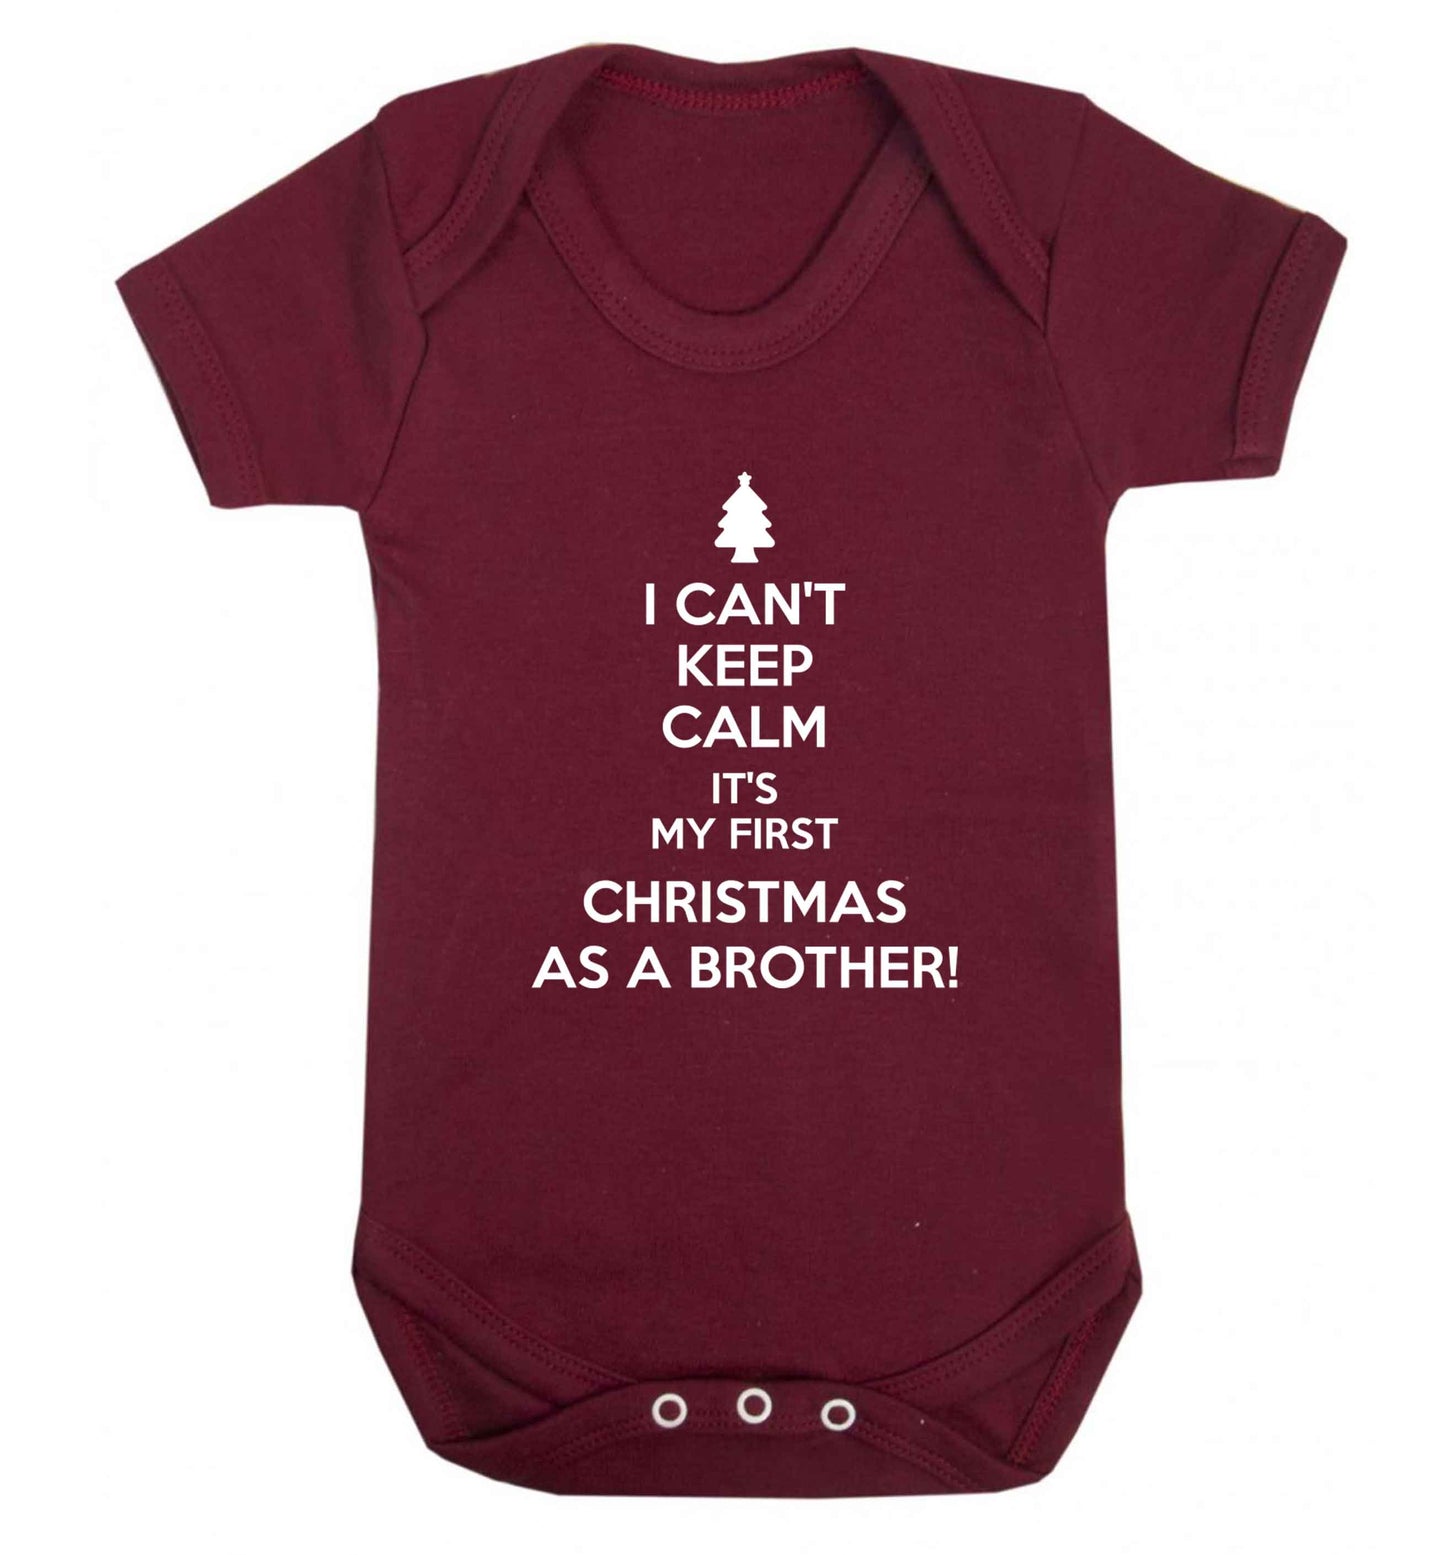 I can't keep calm it's my first Christmas as a brother! Baby Vest maroon 18-24 months